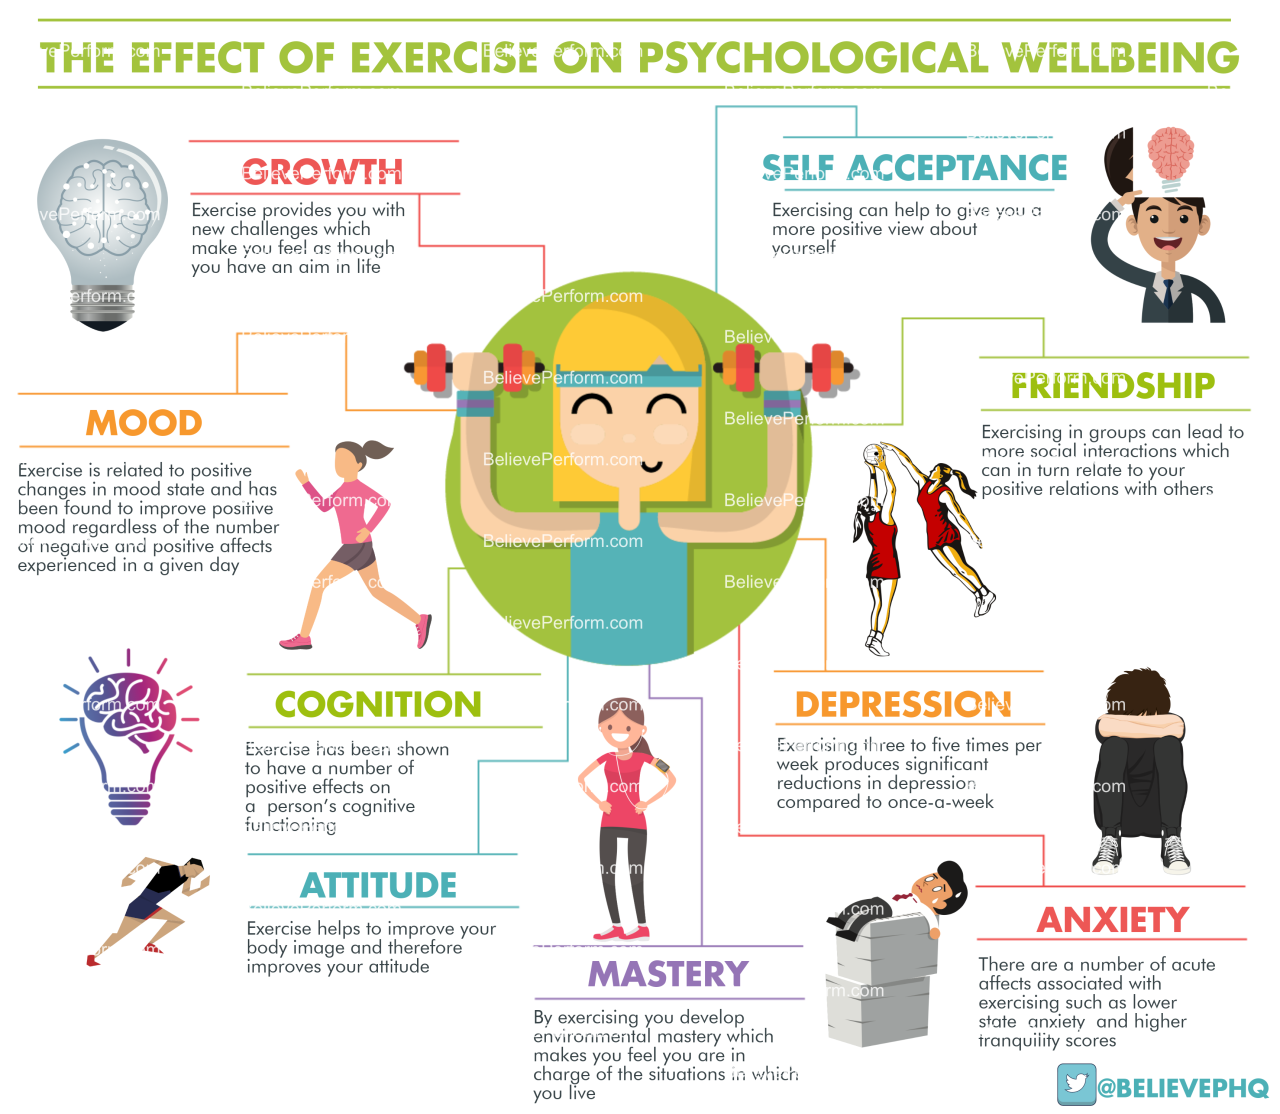 Your level of physical health cannot affect your mental/emotional health